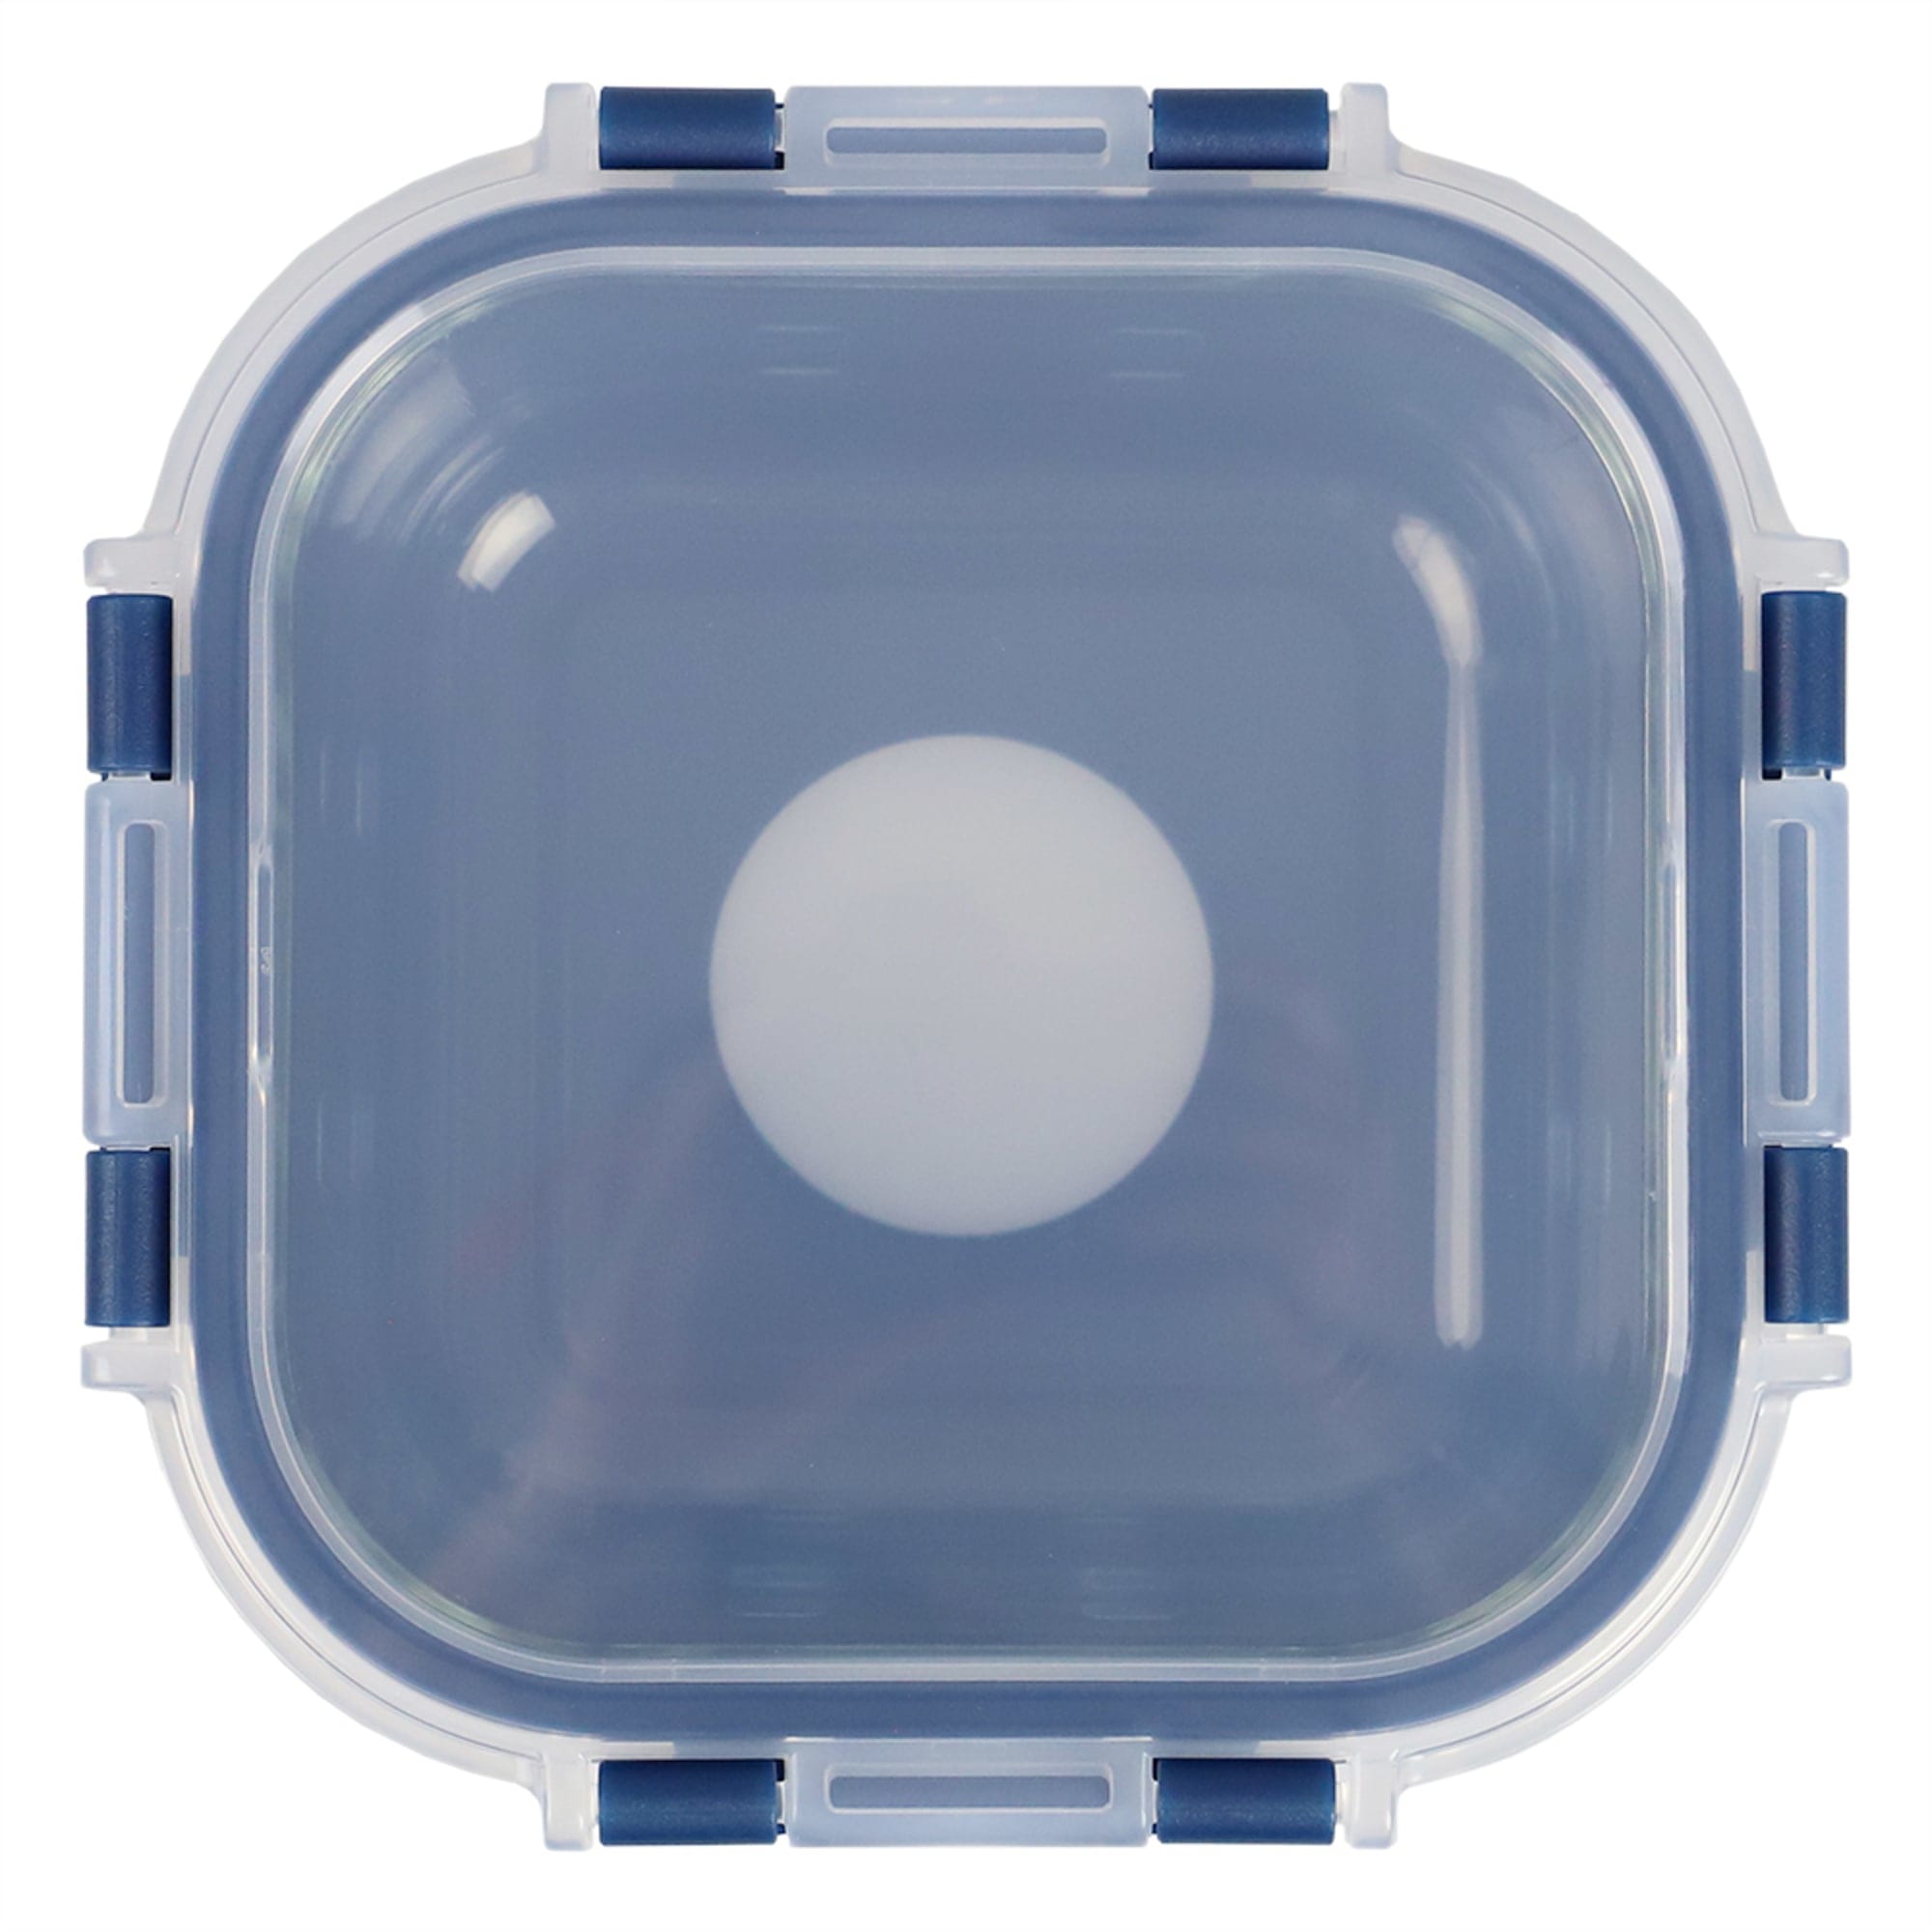 Michael Graves Design Square 17 Ounce High Borosilicate Glass Food Storage Container with Plastic Lid, Indigo $6.00 EACH, CASE PACK OF 12